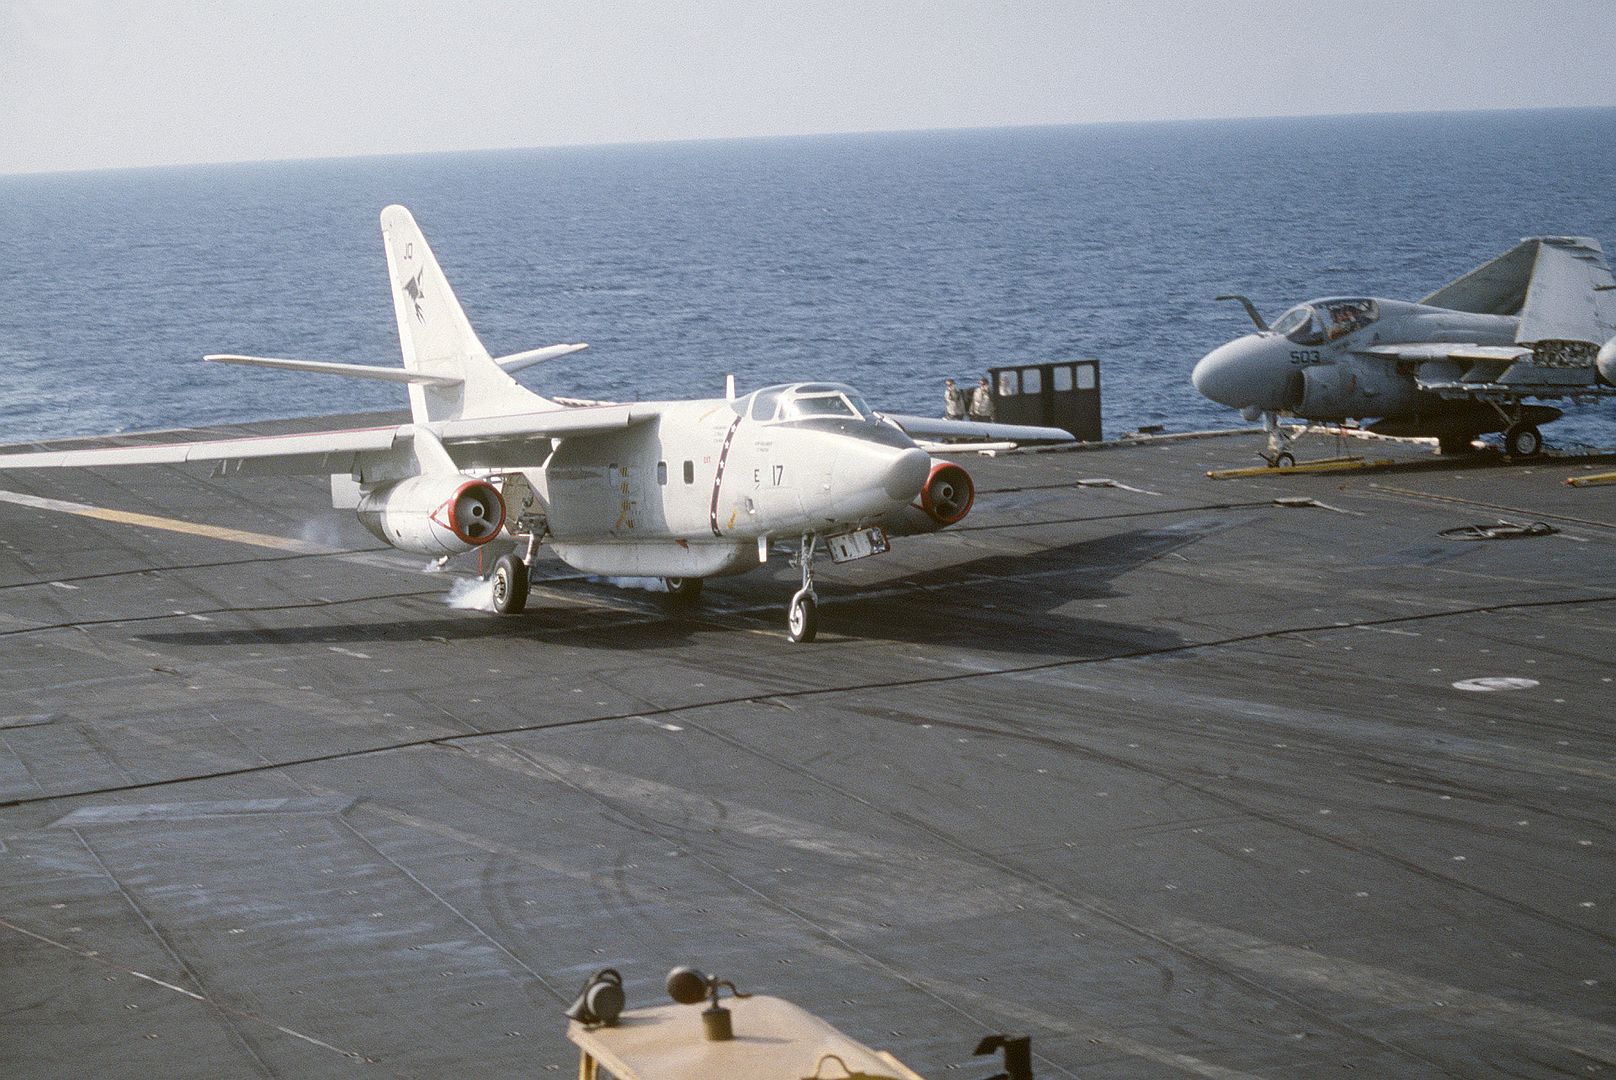 3B Skywarrior Aircraft Lands Aboard The Aircraft Carrier USS CORAL SEA CV 43 During Flight Operations Off The Coast Of Libya